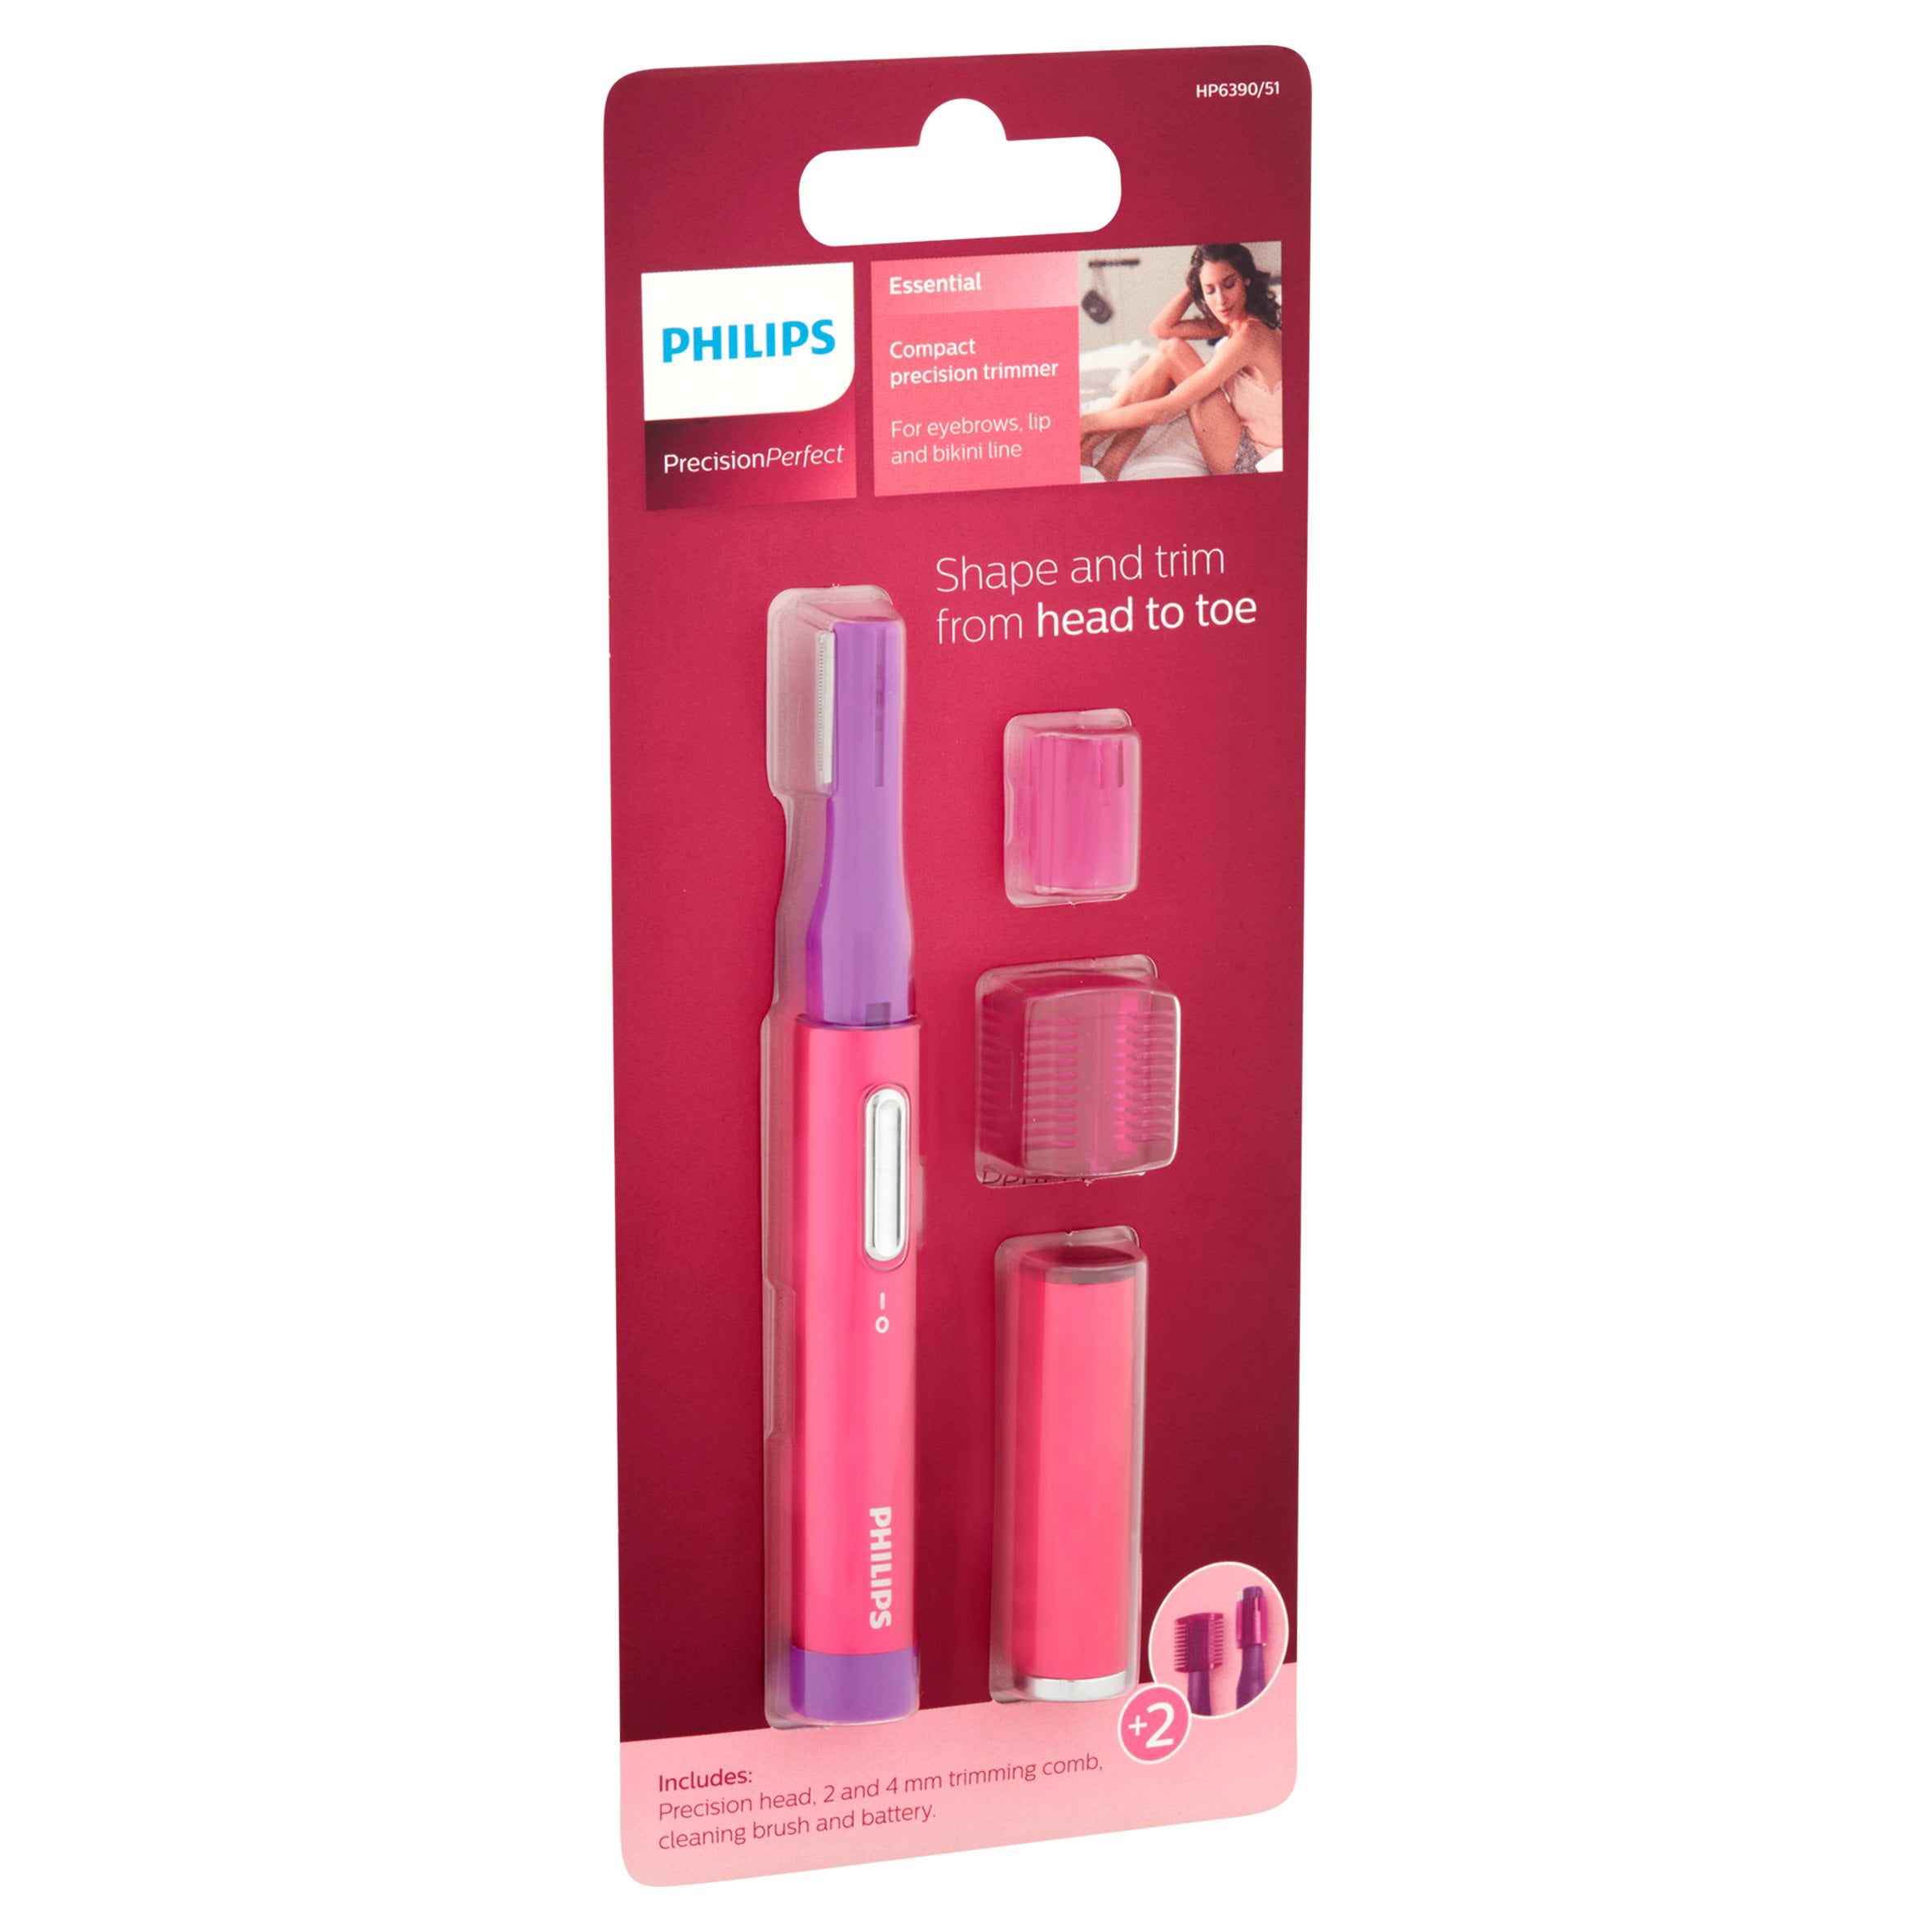 philips satin compact women's precision trimmer